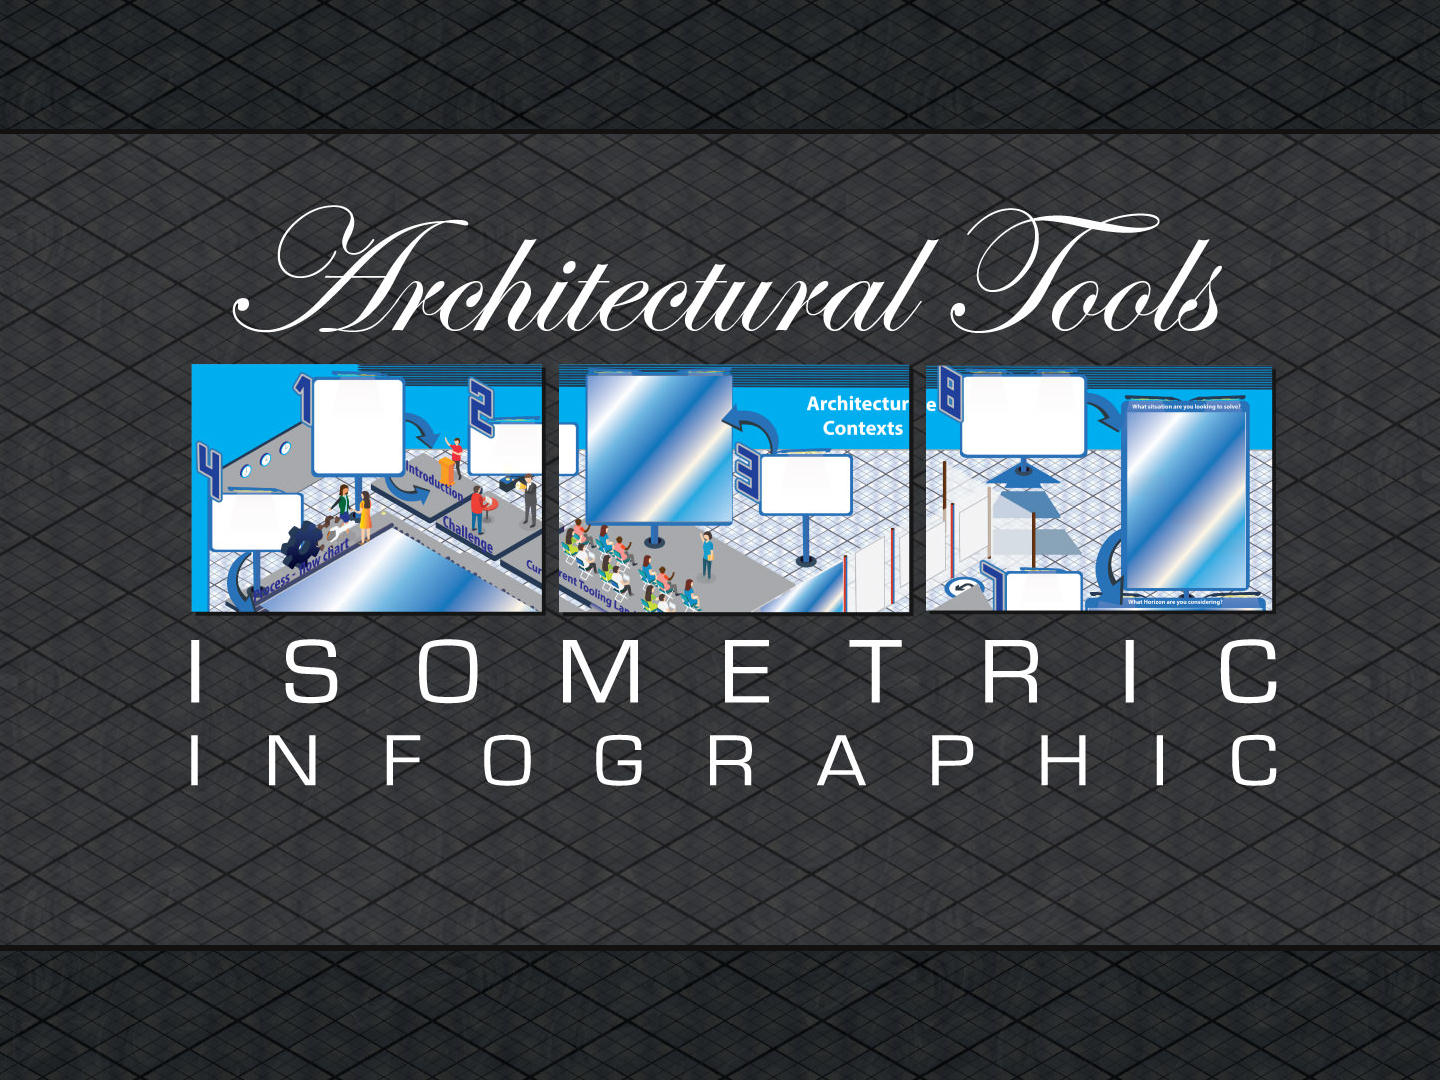 Isometric infographic showcasing the architectural tools required to maintain a telecomunications company.